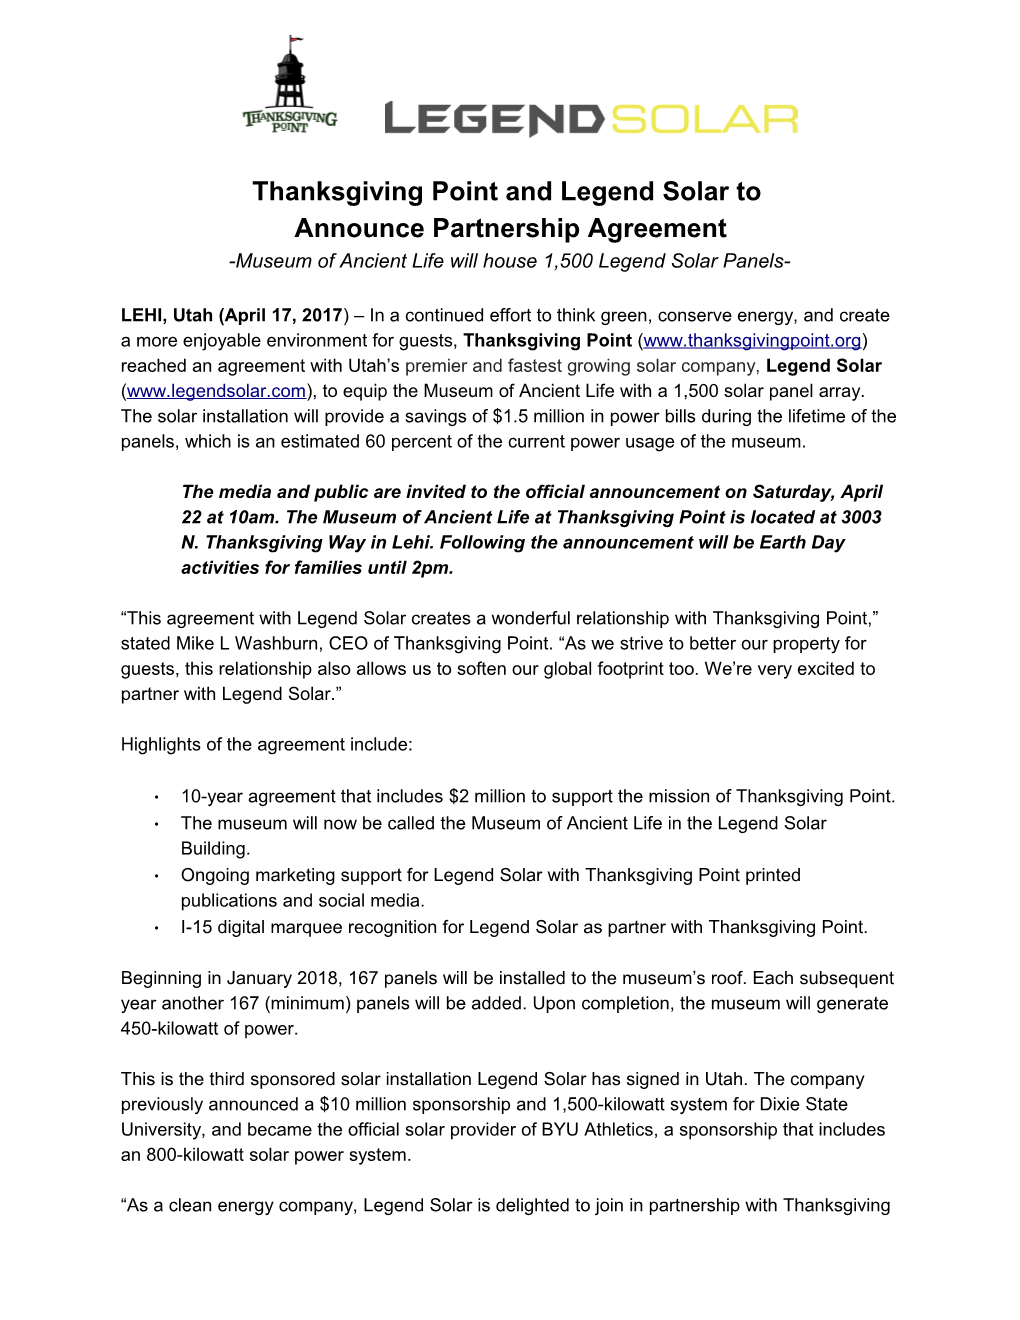 Thanksgiving Point and Legend Solar to Announce Partnership Agreement